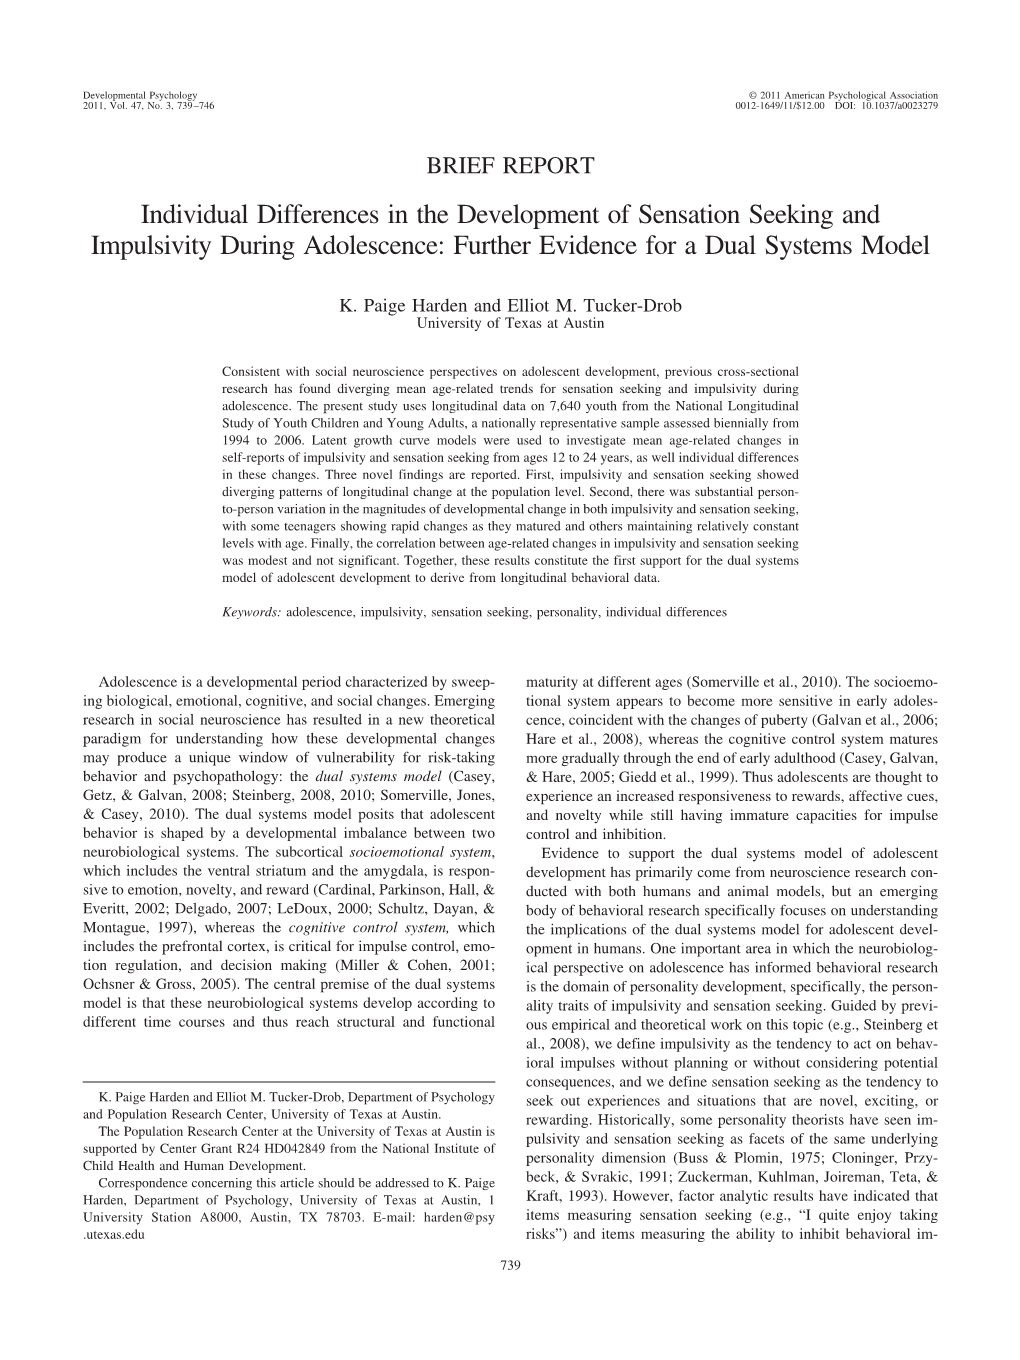 Individual Differences in the Development of Sensation Seeking and Impulsivity During Adolescence: Further Evidence for a Dual Systems Model